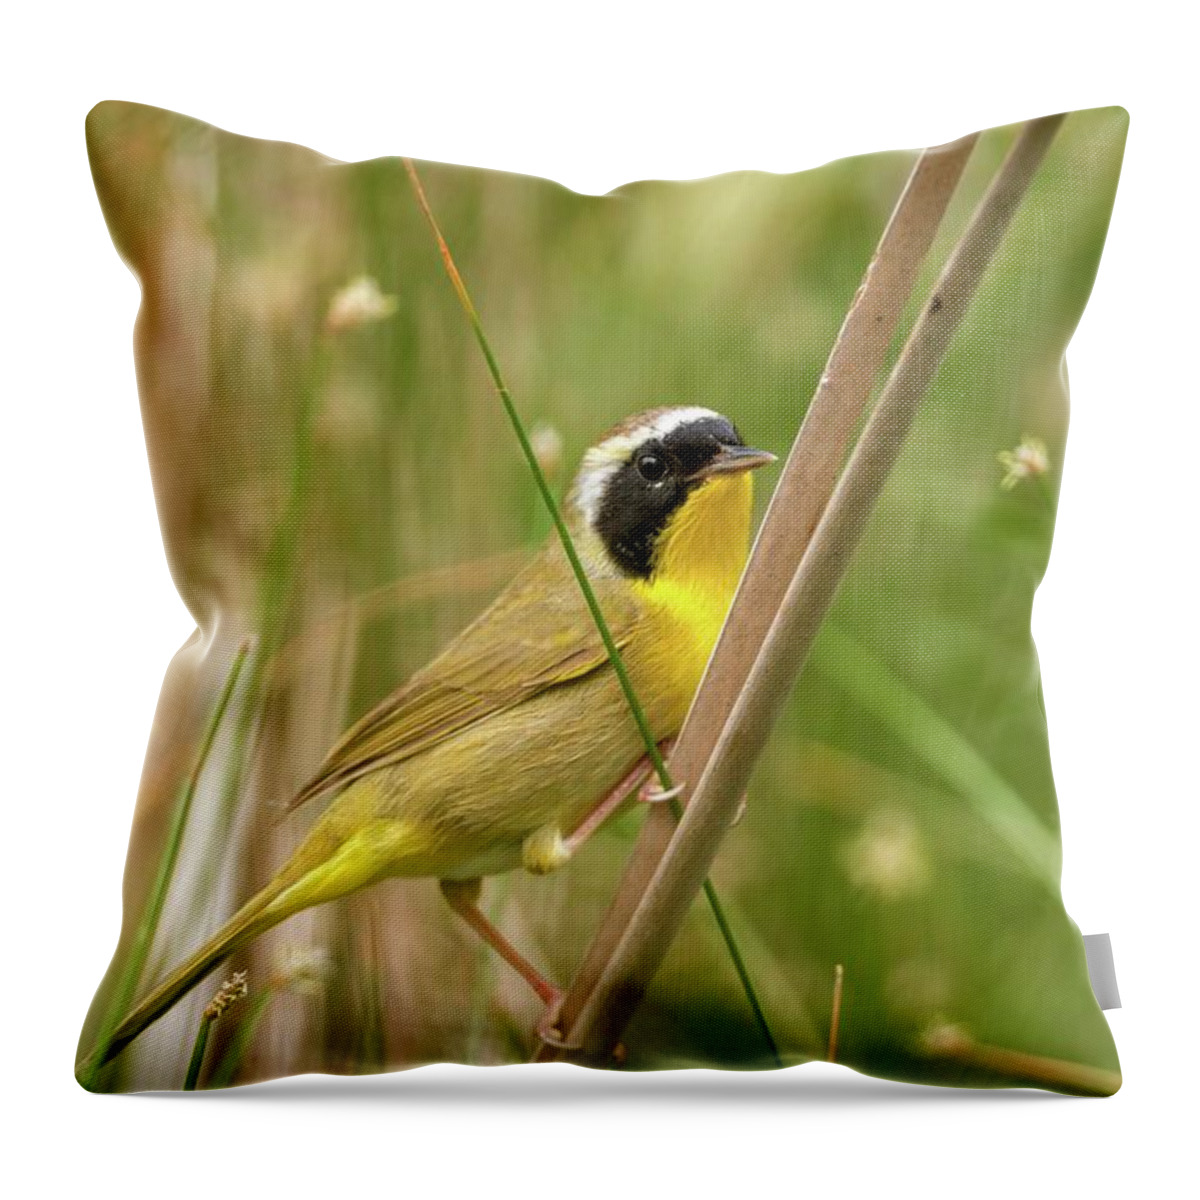 Common Throw Pillow featuring the photograph Common Yellowthroat in the Marsh by Liza Eckardt